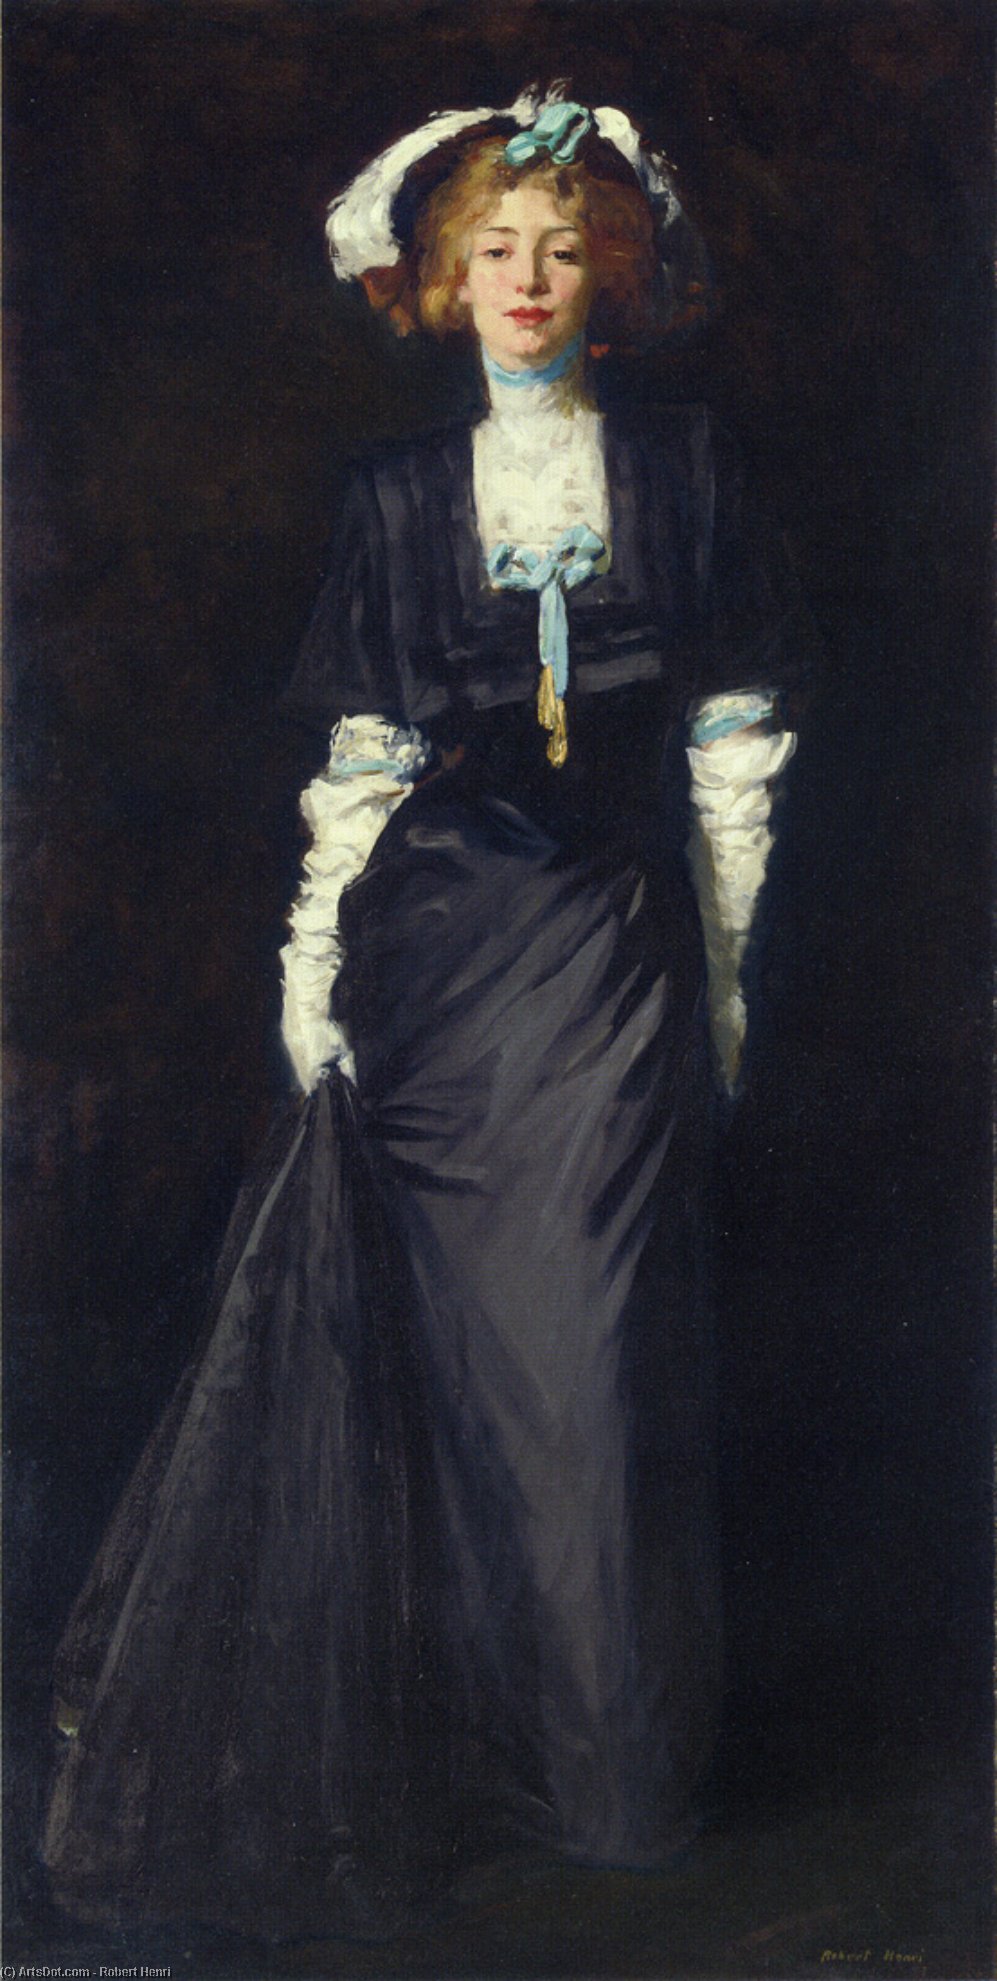 Buy Museum Art Reproductions Jessica Penn in Black with White Plumes, 1908 by Robert Henri (1865-1929, United States) | ArtsDot.com